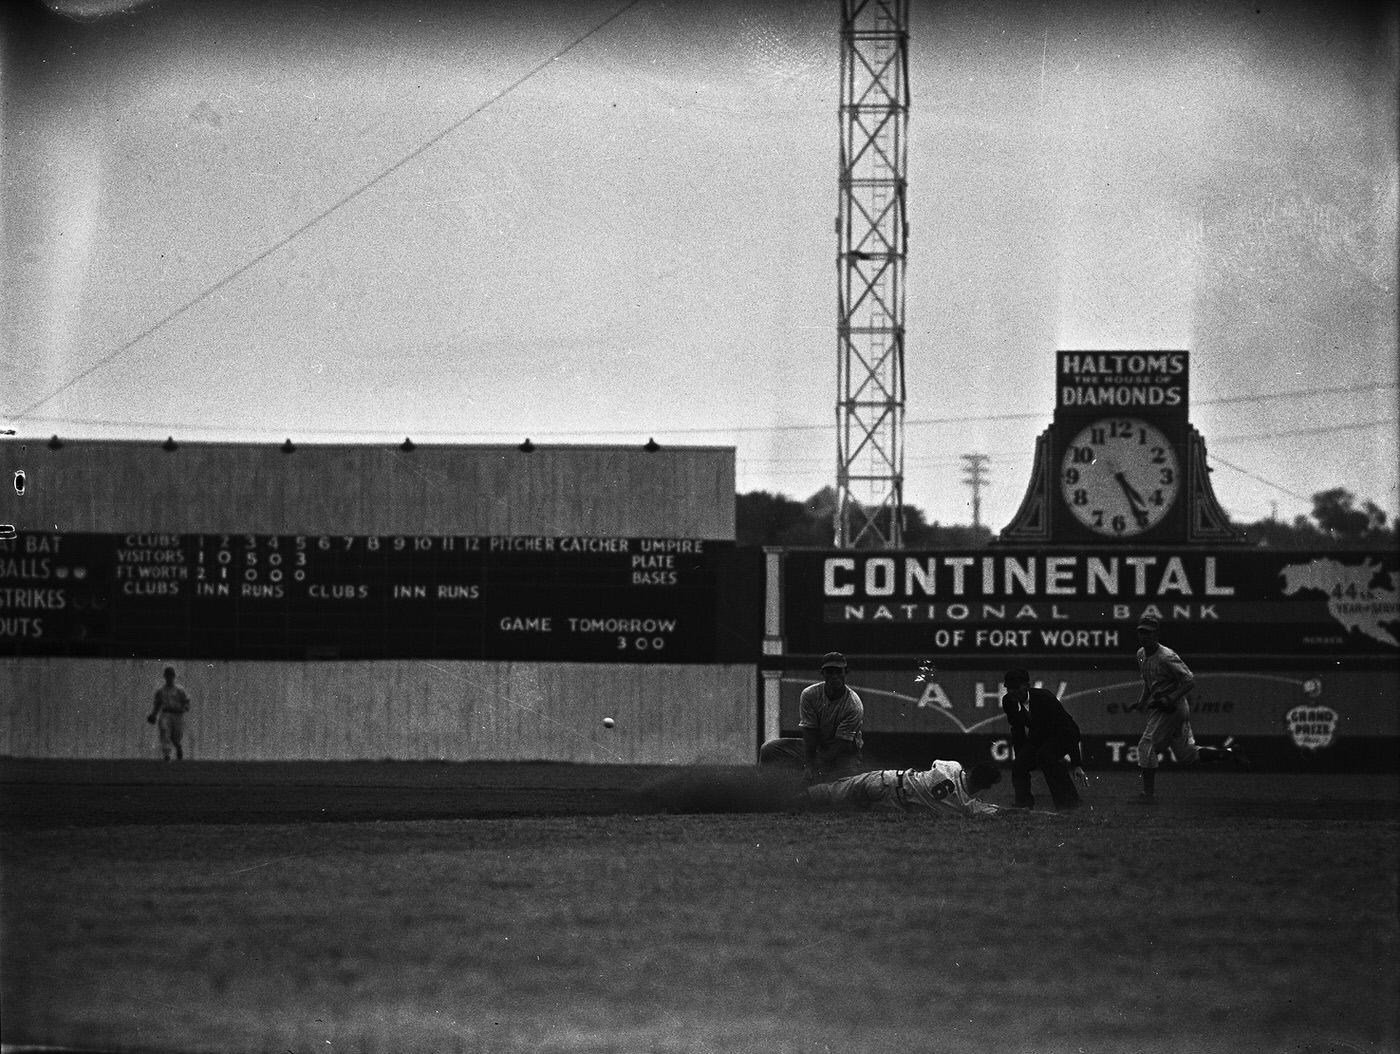 Fort Worth Cats vs. St. Louis Cardinals, 1946